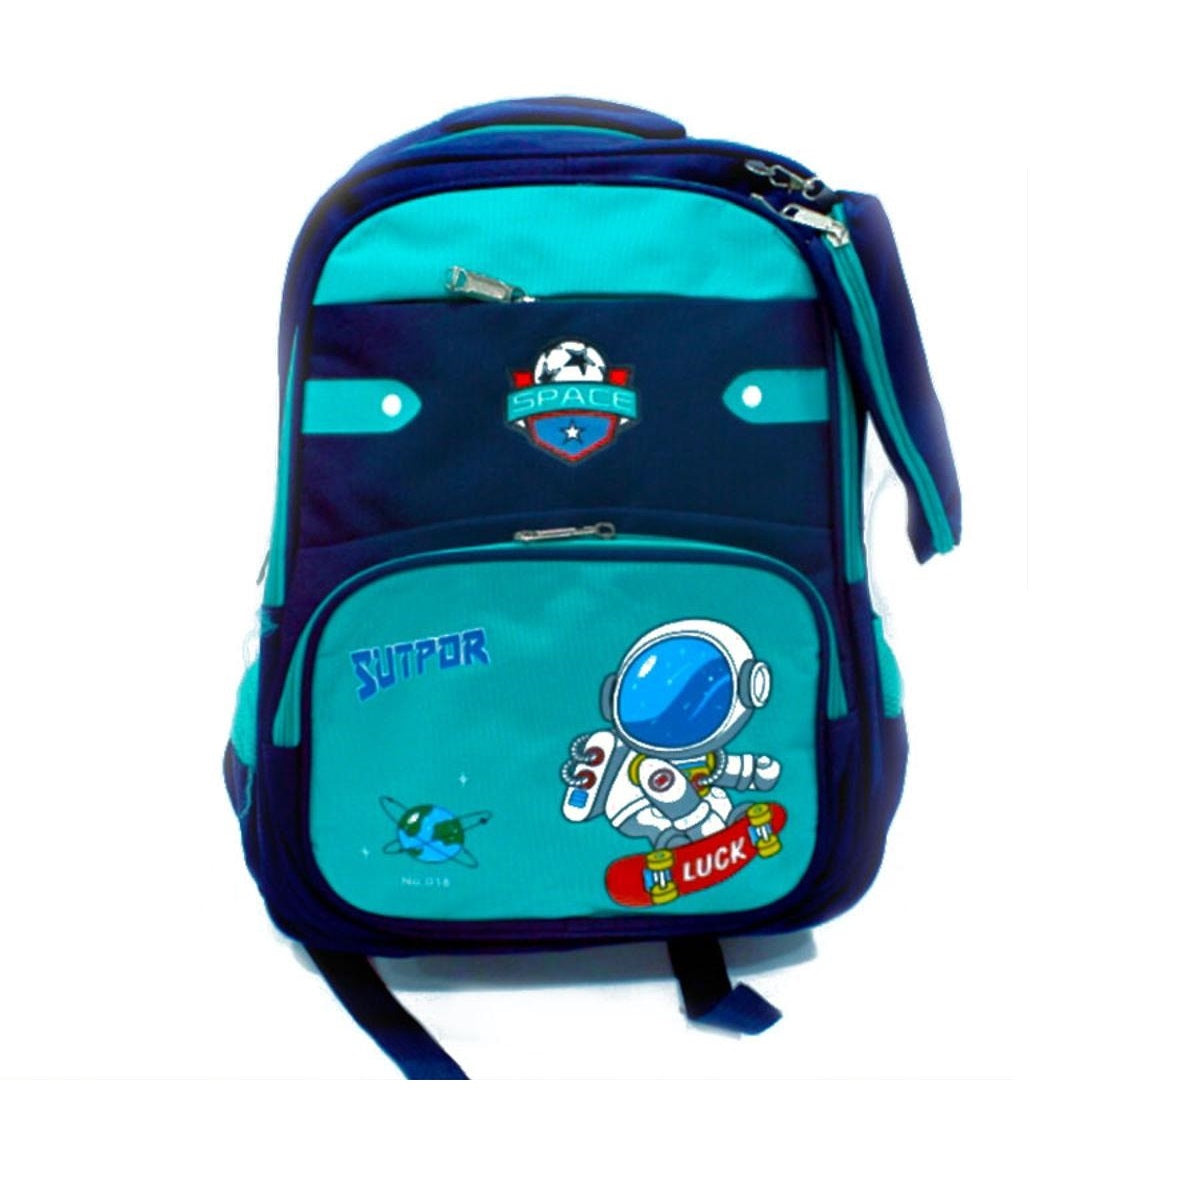 Kids Cartoon Astronaut School Bag with Pencil Pouch for Class 2 to 5